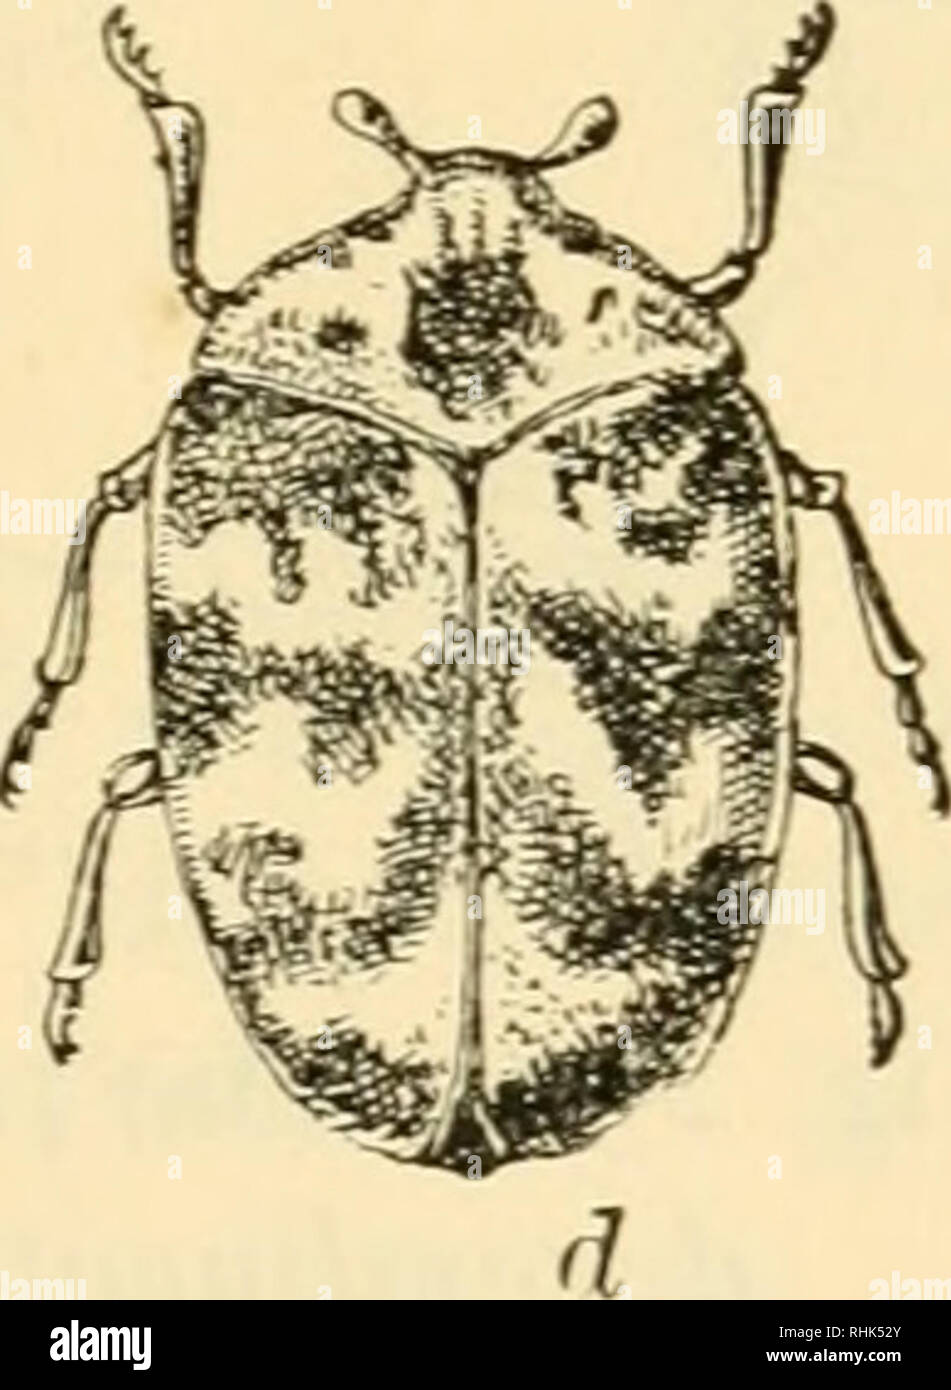 . Biology and human life. Biology. Fig. 234. The buffalo moth This insect {Anthrenus scrophulariae) is a beetle, but is commonly called a moth because it injures furs and rugs in a manner resembling that of the clothes moth. a, larva; b, pupa in larval skin; c, pupa; d, adult. (Greatly enlarged) the Civil War. The larvae feed upon the foliage of many kinds of forest and orchard trees, ruining the plants completely. The codling moth is familiar to everyone who has found a wormy apple. This insect is present wherever apple trees are grown, and in some regions it destroys from 40 to 75 per cent o Stock Photo